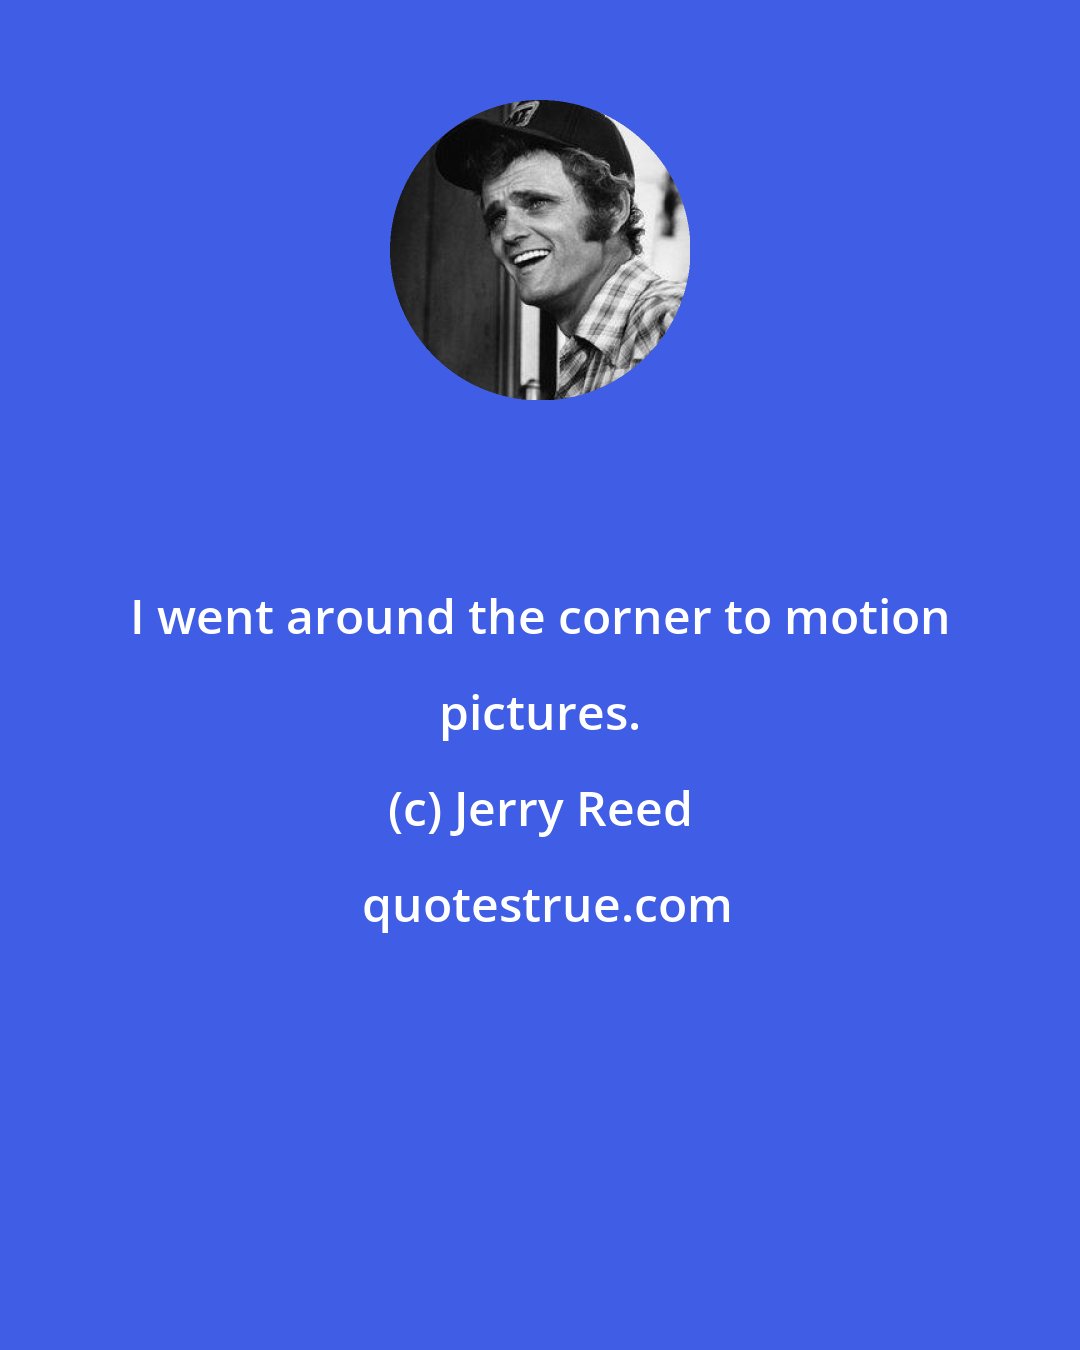 Jerry Reed: I went around the corner to motion pictures.